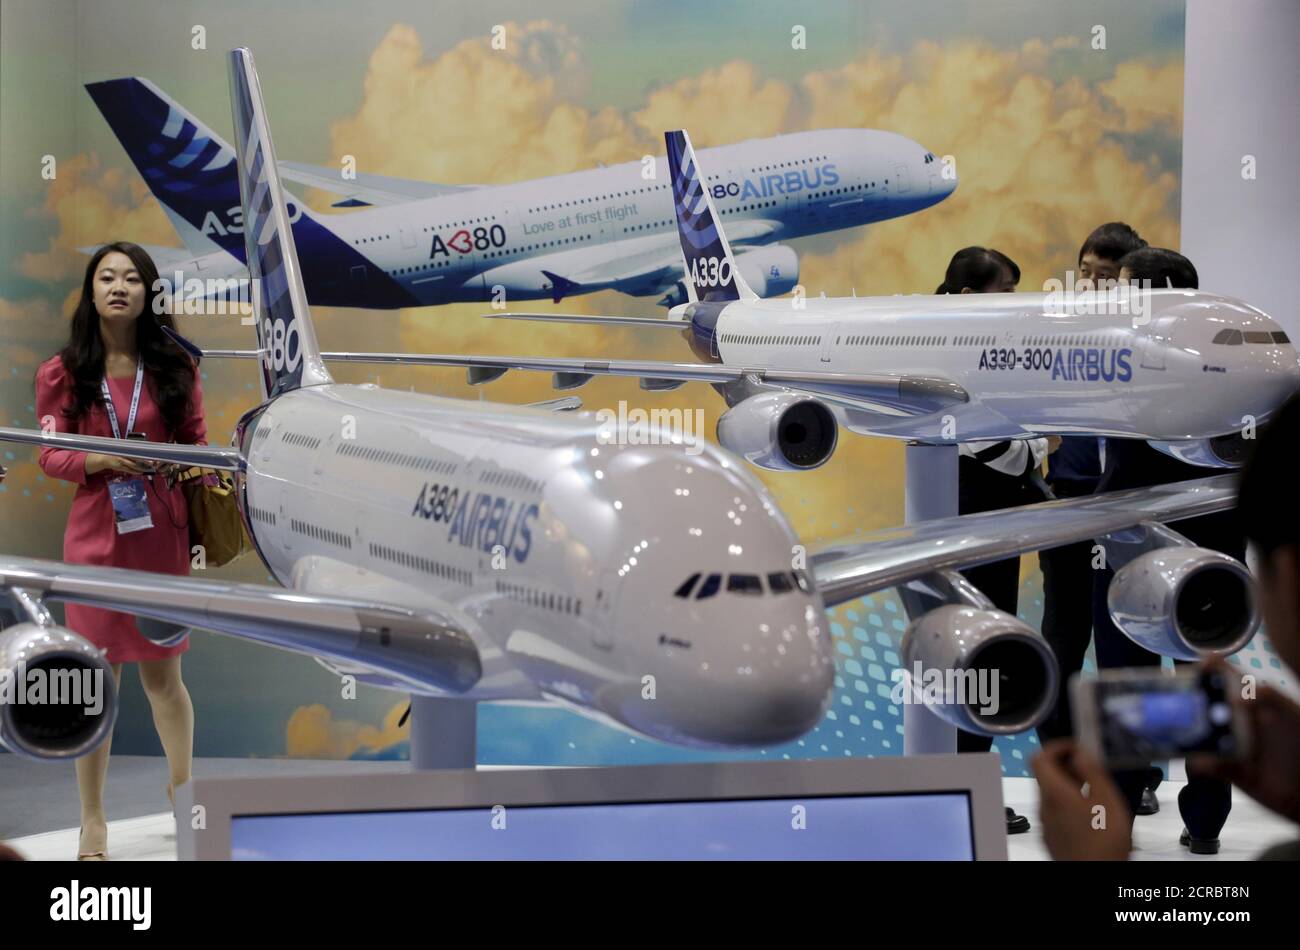 A visitor stands next to models of Airbus A380 and A330 at the Aviation Expo China 2015, in Beijing, China, September 16, 2015. The four-day Aviation Expo China 2015 kicked off on Wednesday. According to local media, the expo is jointly organized by Aviation Industry Corporation of China (AVIC), Commercial Aircraft Corporation of China Ltd. (COMAC) and etc. Around 150 exhibitors from 16 countries were invited. REUTERS/Jason Lee Stock Photo